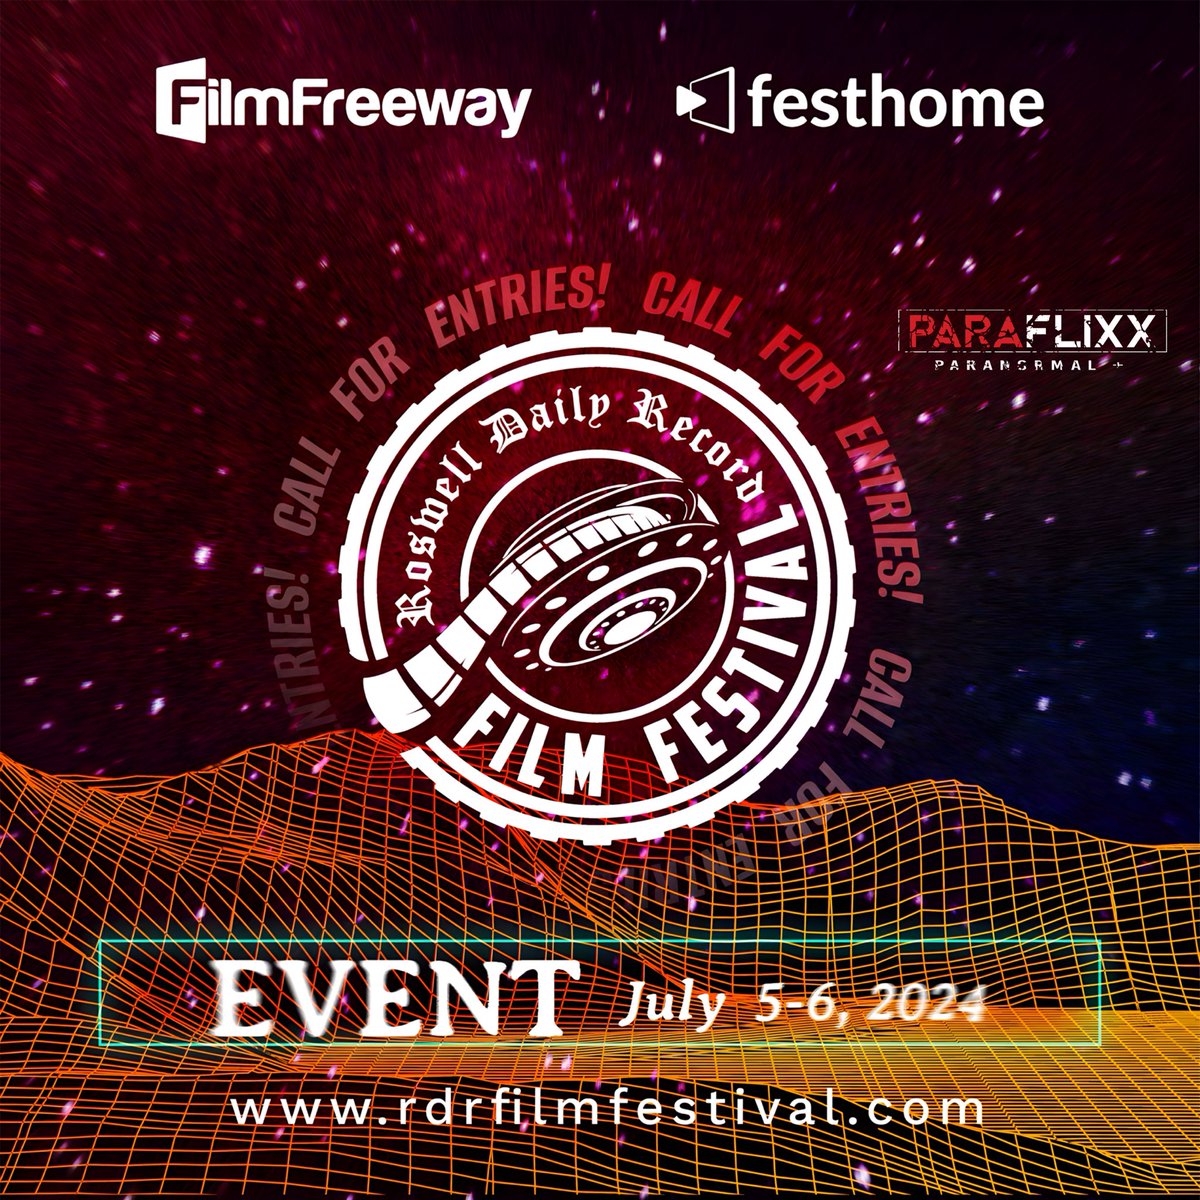 📣: Calling all producers, directors, film makers and PARAFlixx paranormal+ producers: We have partnered with Roswell Daily Record Film Festival rdrfilmfestival.com, brought to you by the Roswell Daily Record, FilmFreeway and Festhome! Submissions can be made by May 31st